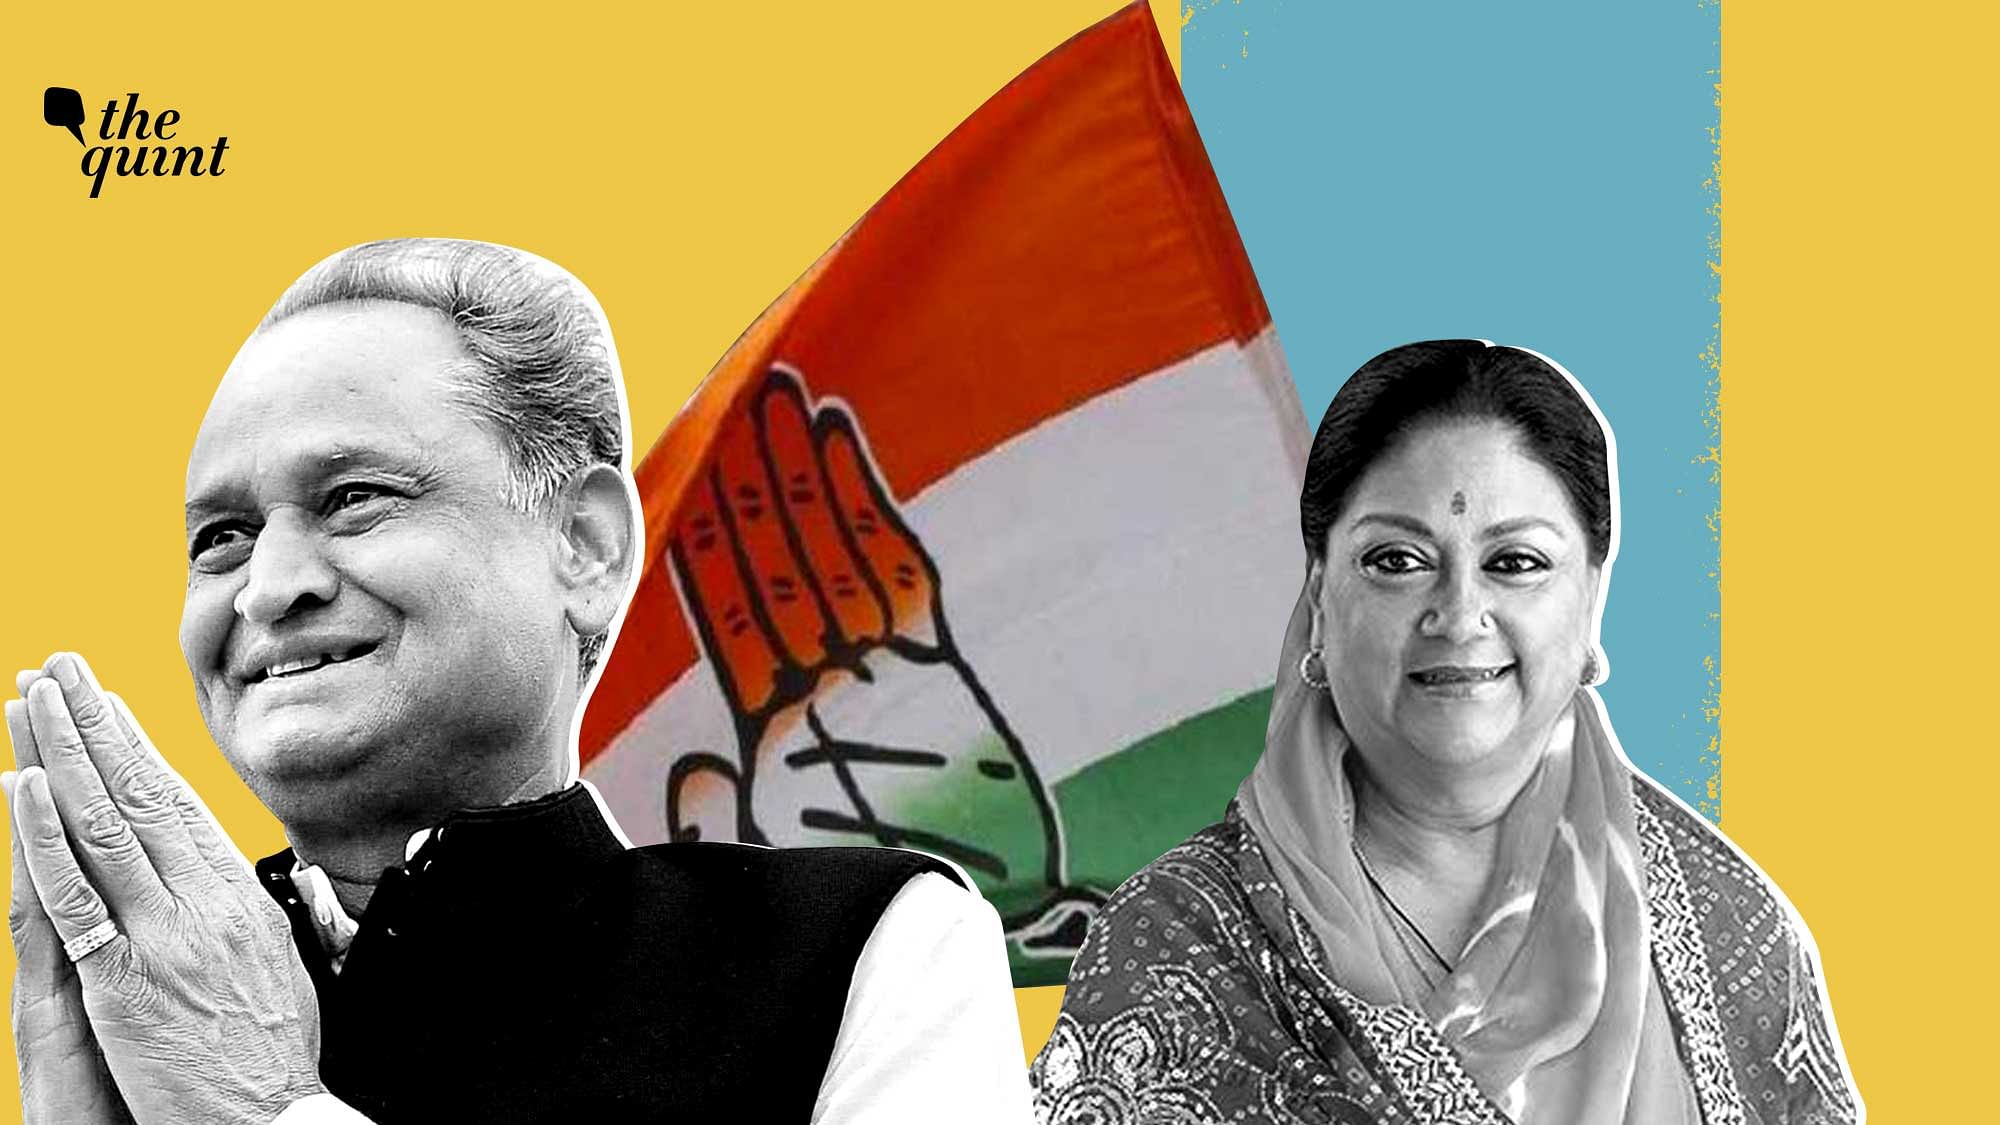 Congress has done better in Nagar Palika elections and BJP in rural polls in Rajasthan. Besides local reasons, there may may be one ‘big picture’ factor in play